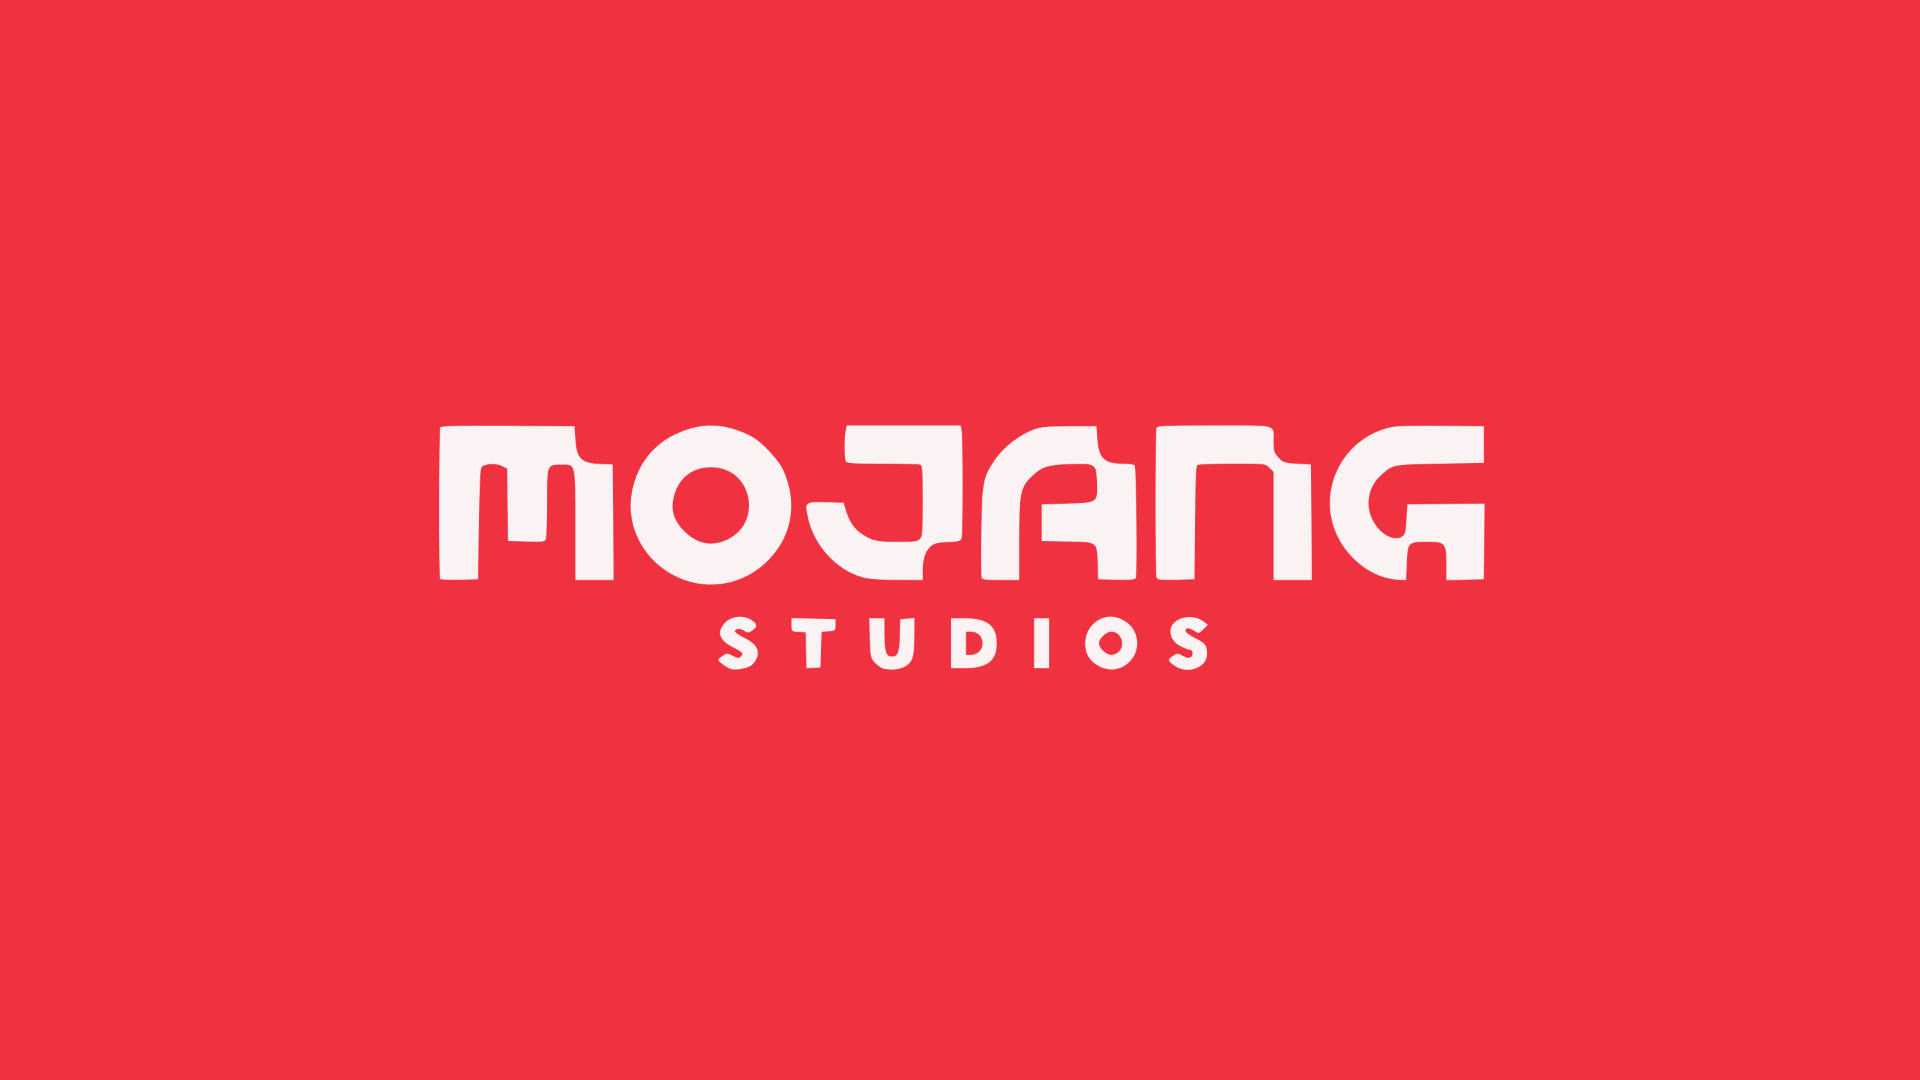 I made an image of a vectorized image of the new Mojang Studios Logo, and then I turned it into a wallpaper